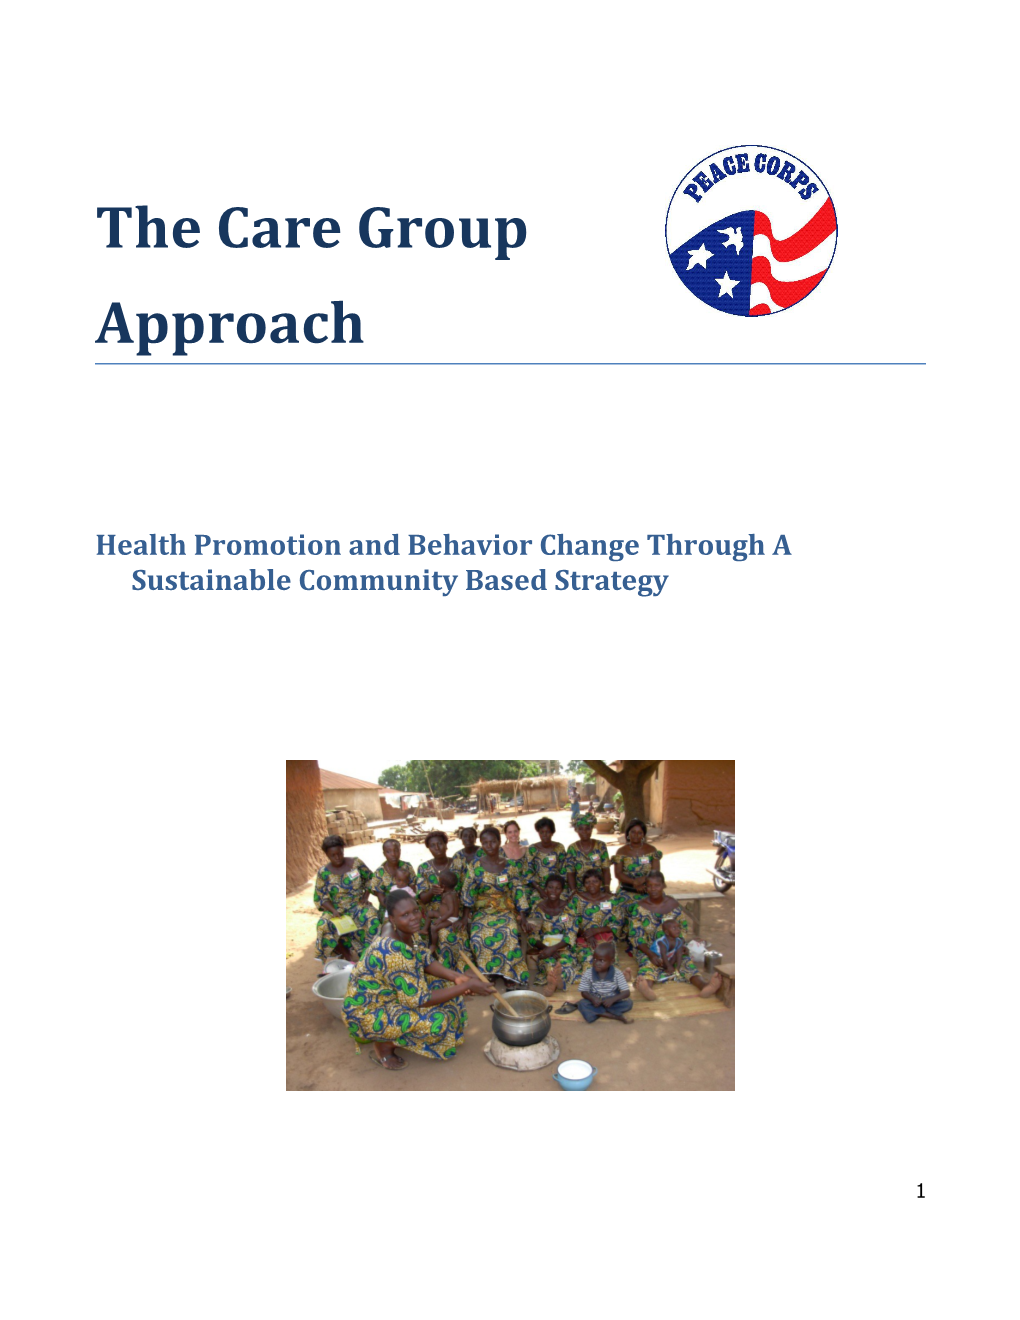 Health Promotion and Behavior Change Through a Sustainable Community Based Strategy